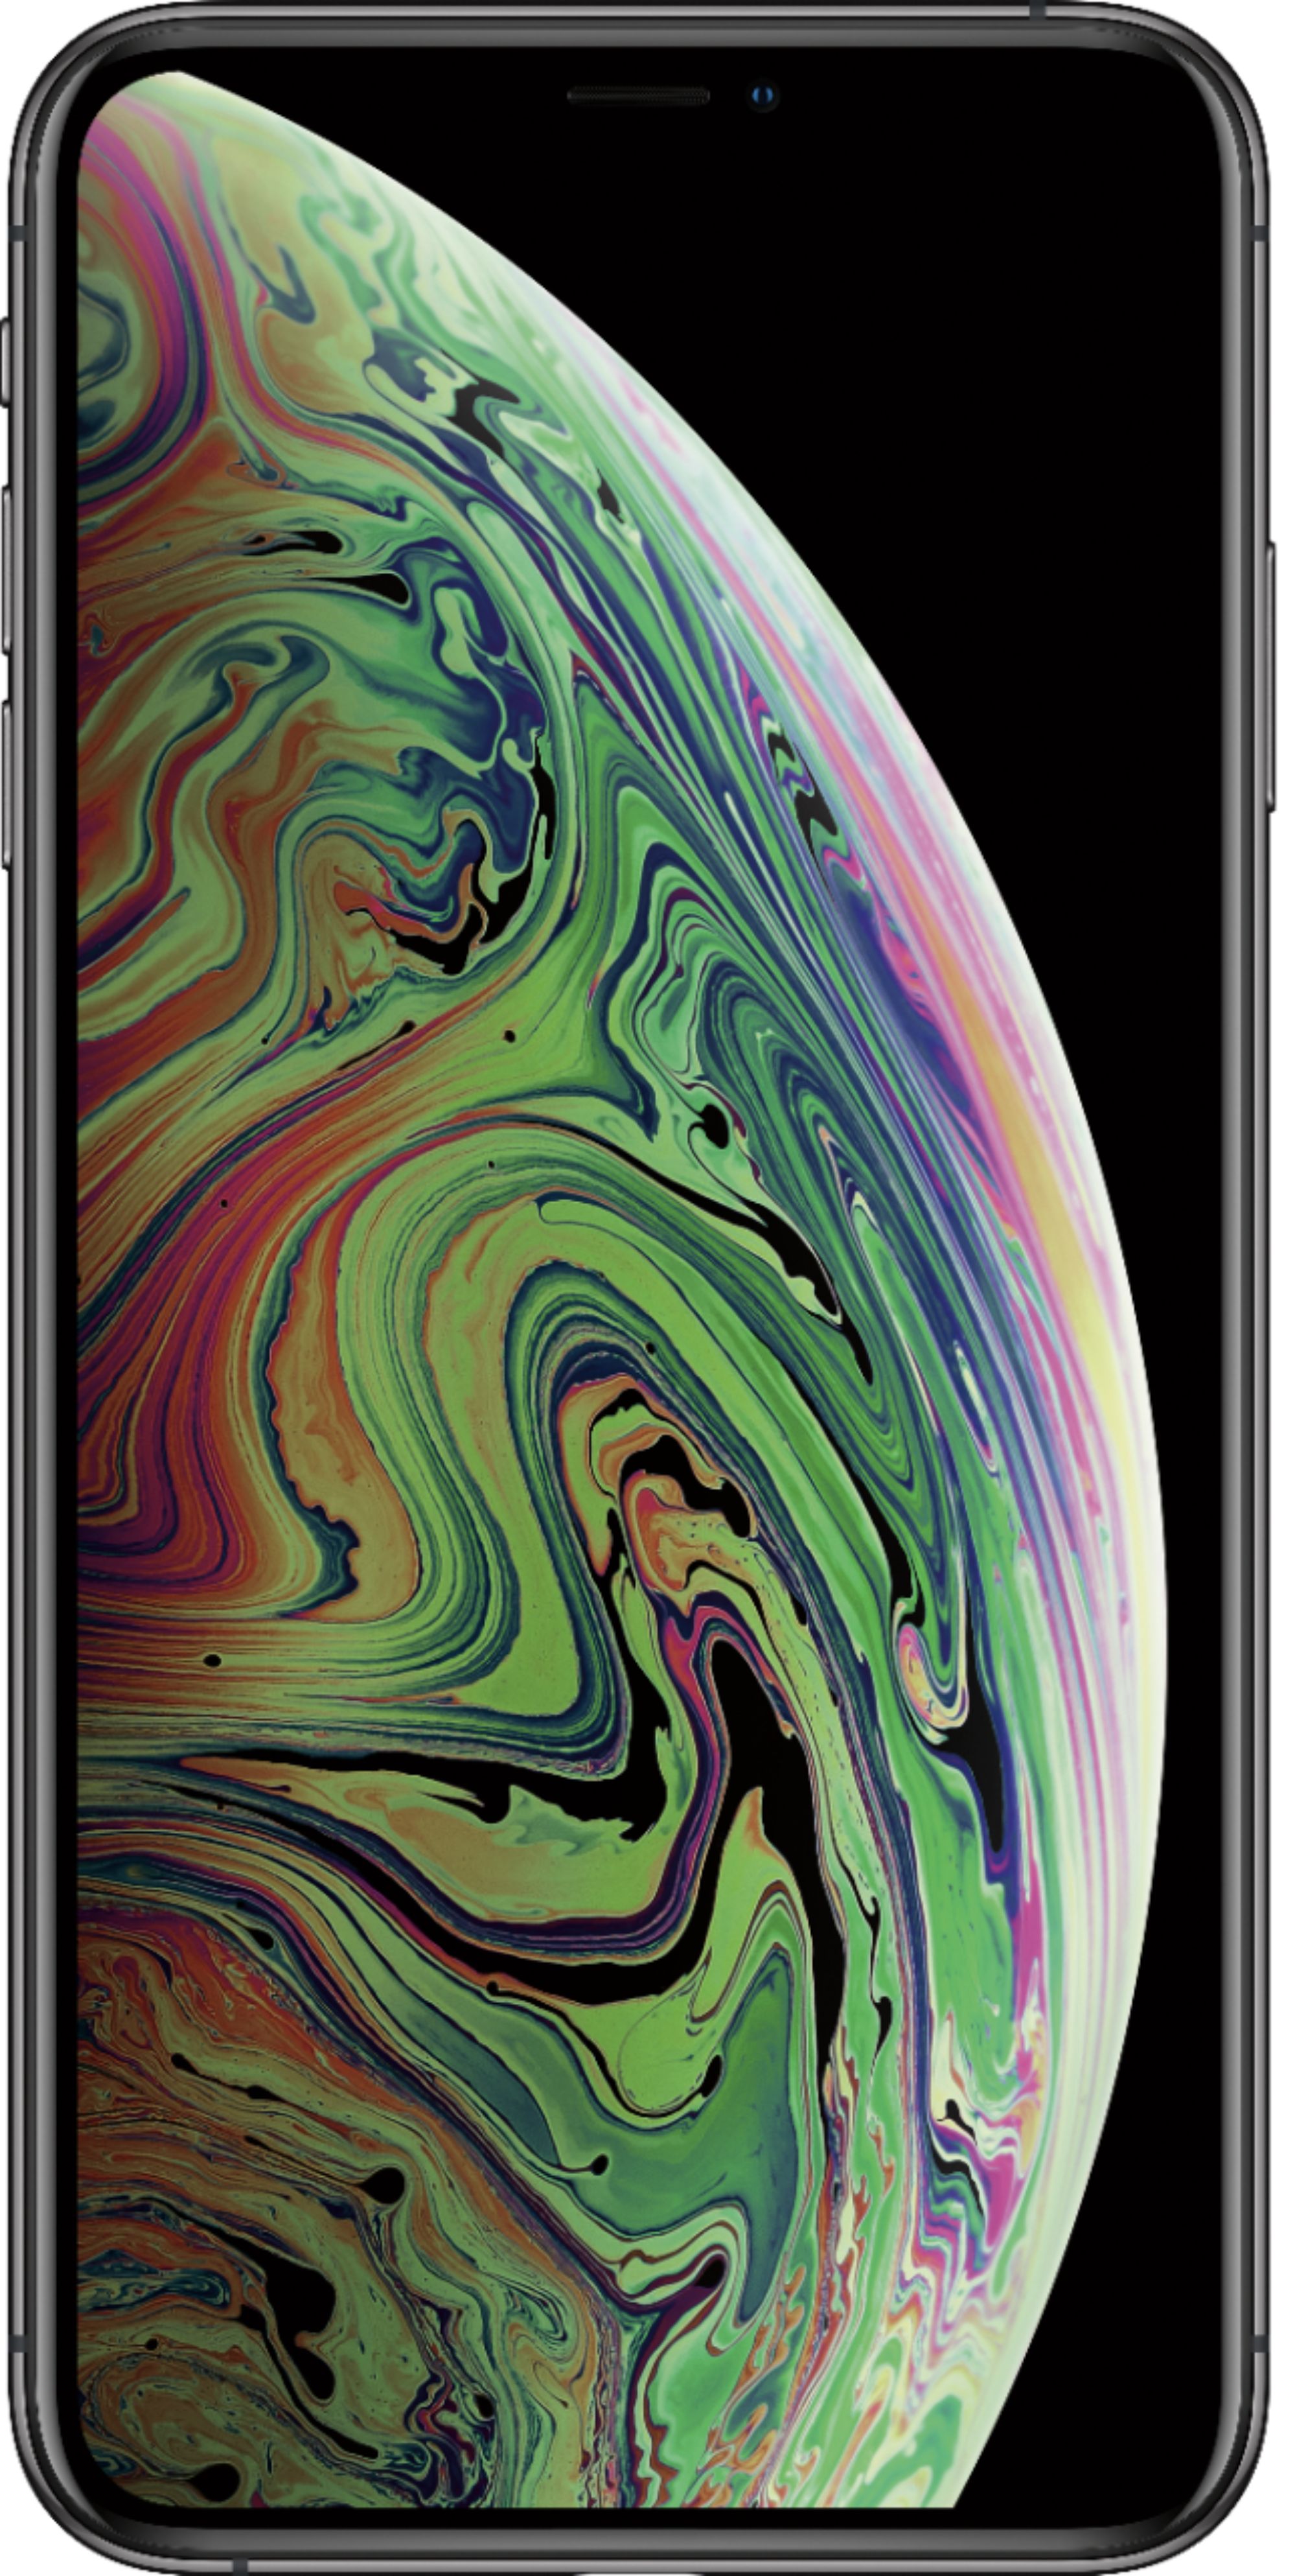 Apple - iPhone XS Max with 64GB Memory Cell Phone (Unlocked) - Space Gray